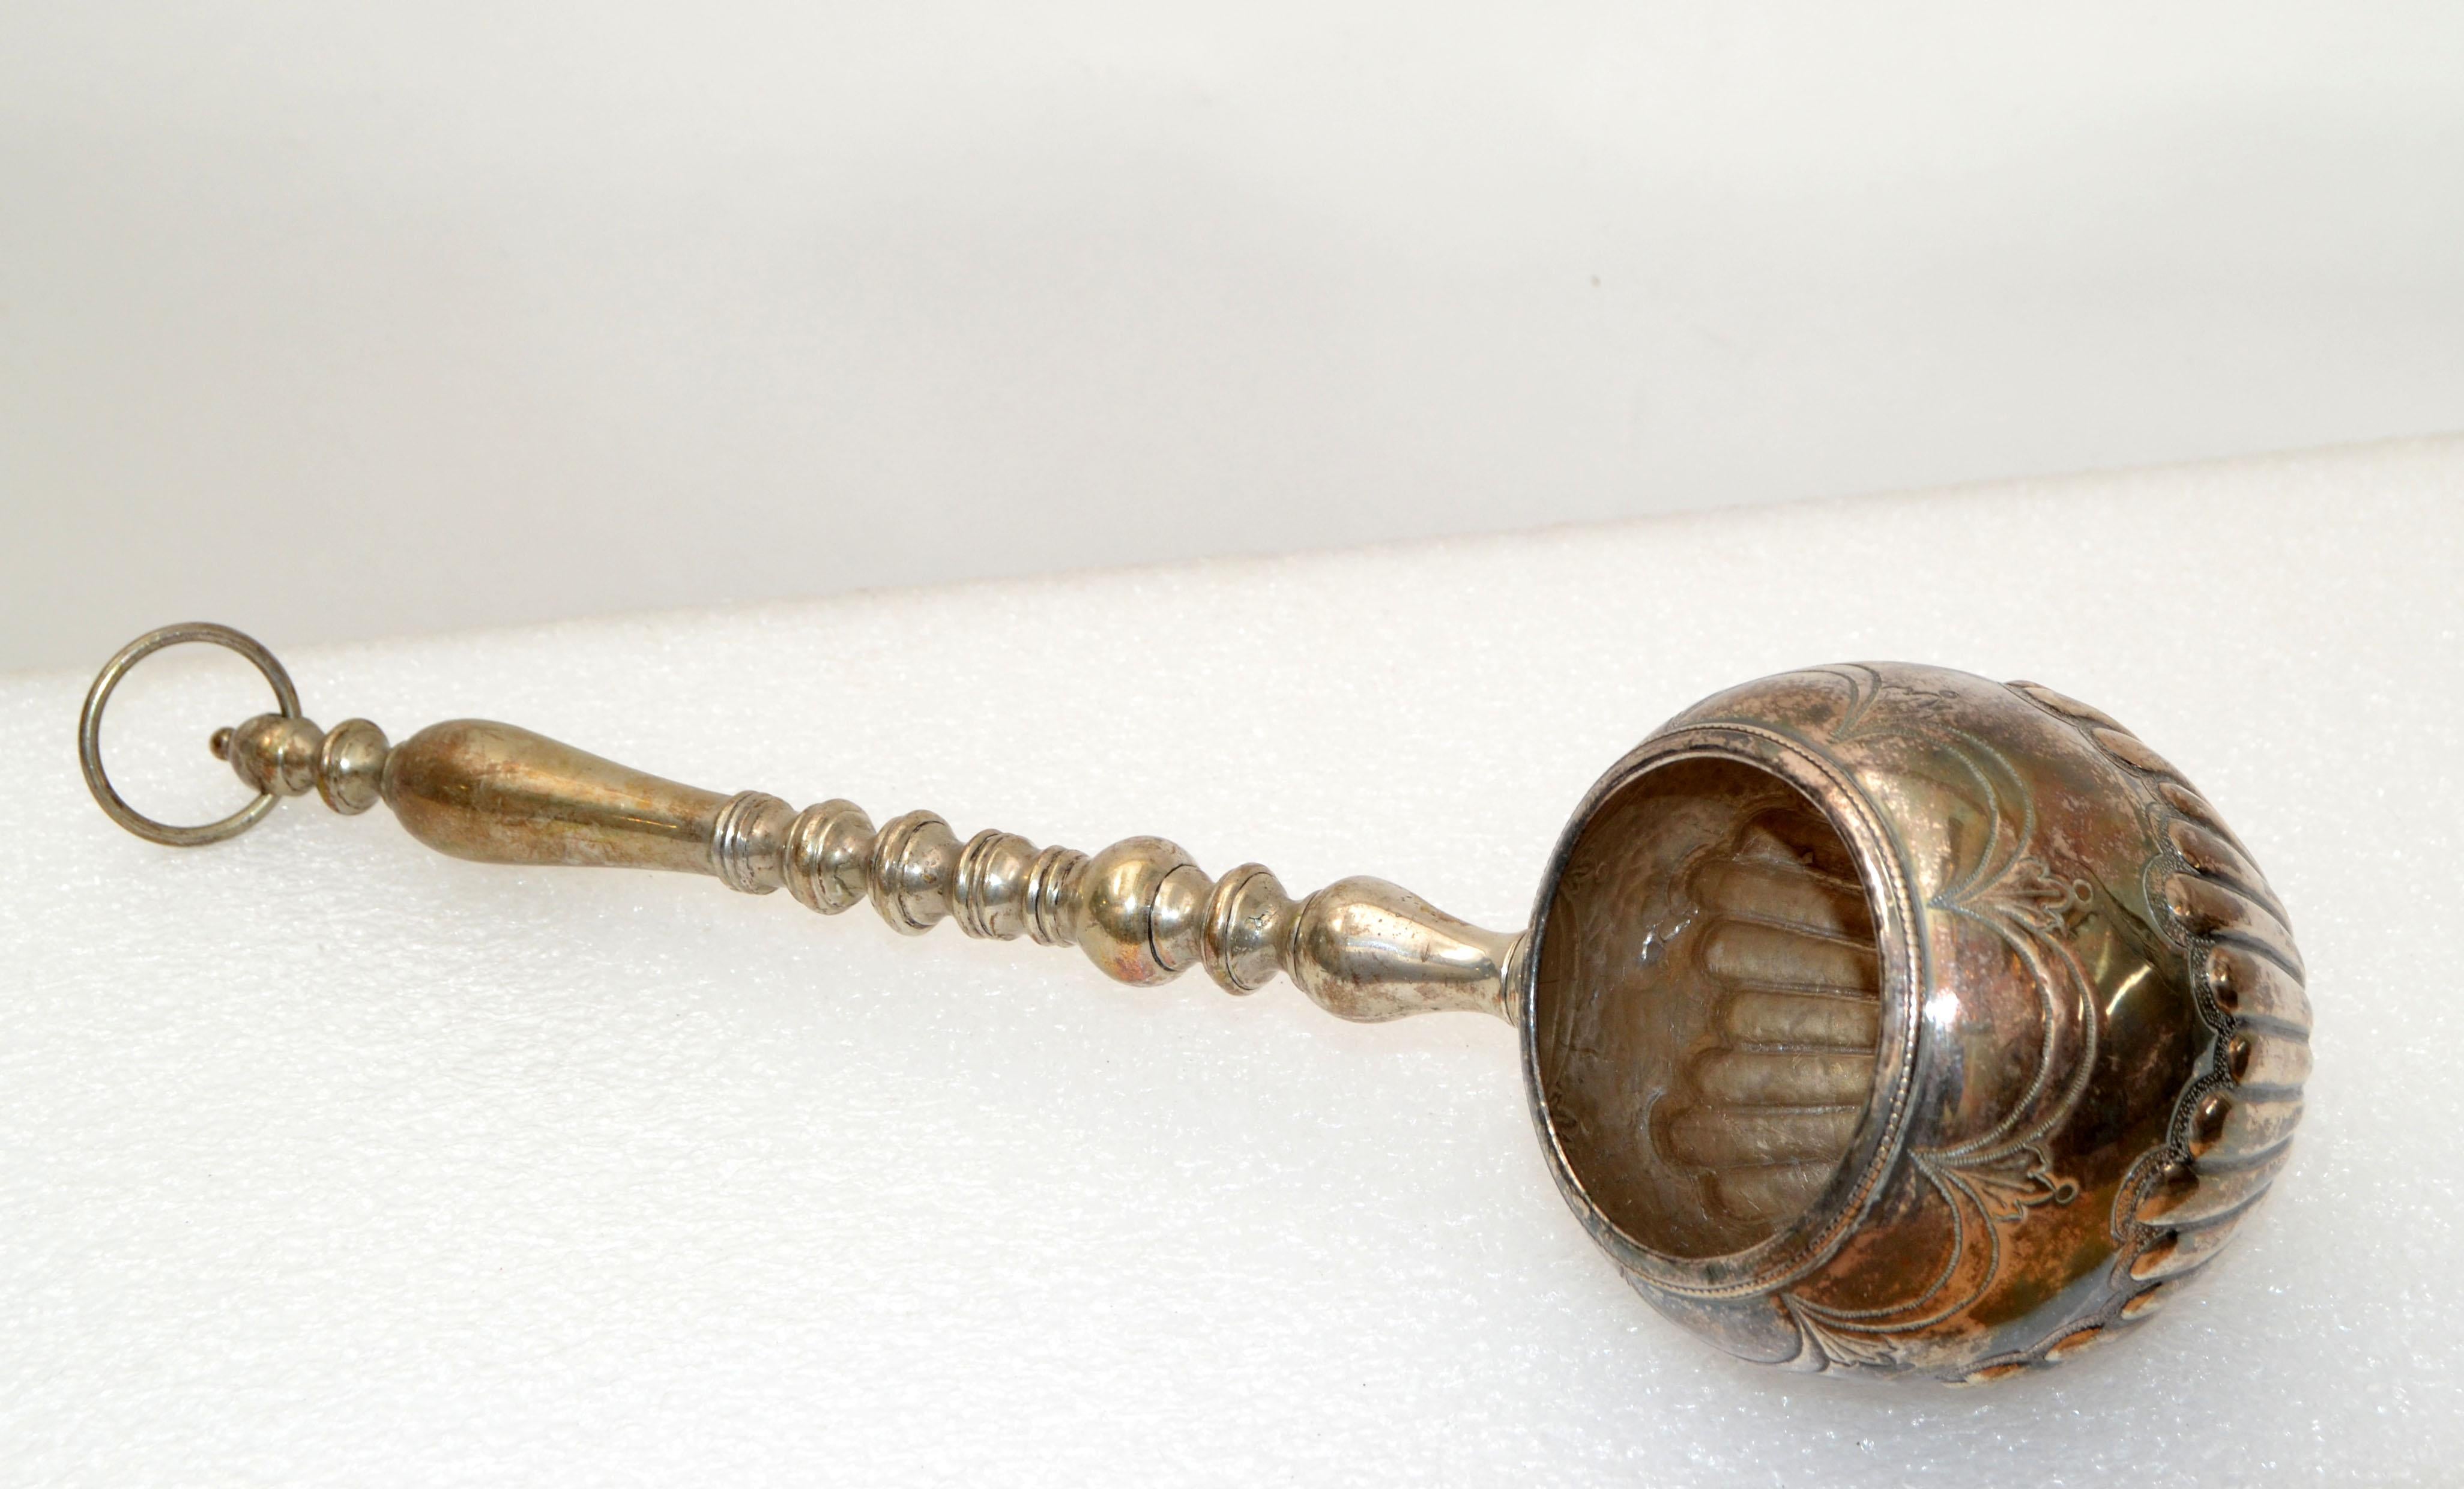 Vintage English silver Ladle with ornate Flowers and decoration.
It is in original vintage condition and has some stains and is tarnished.
Quadrupled Silver Plate not marked.